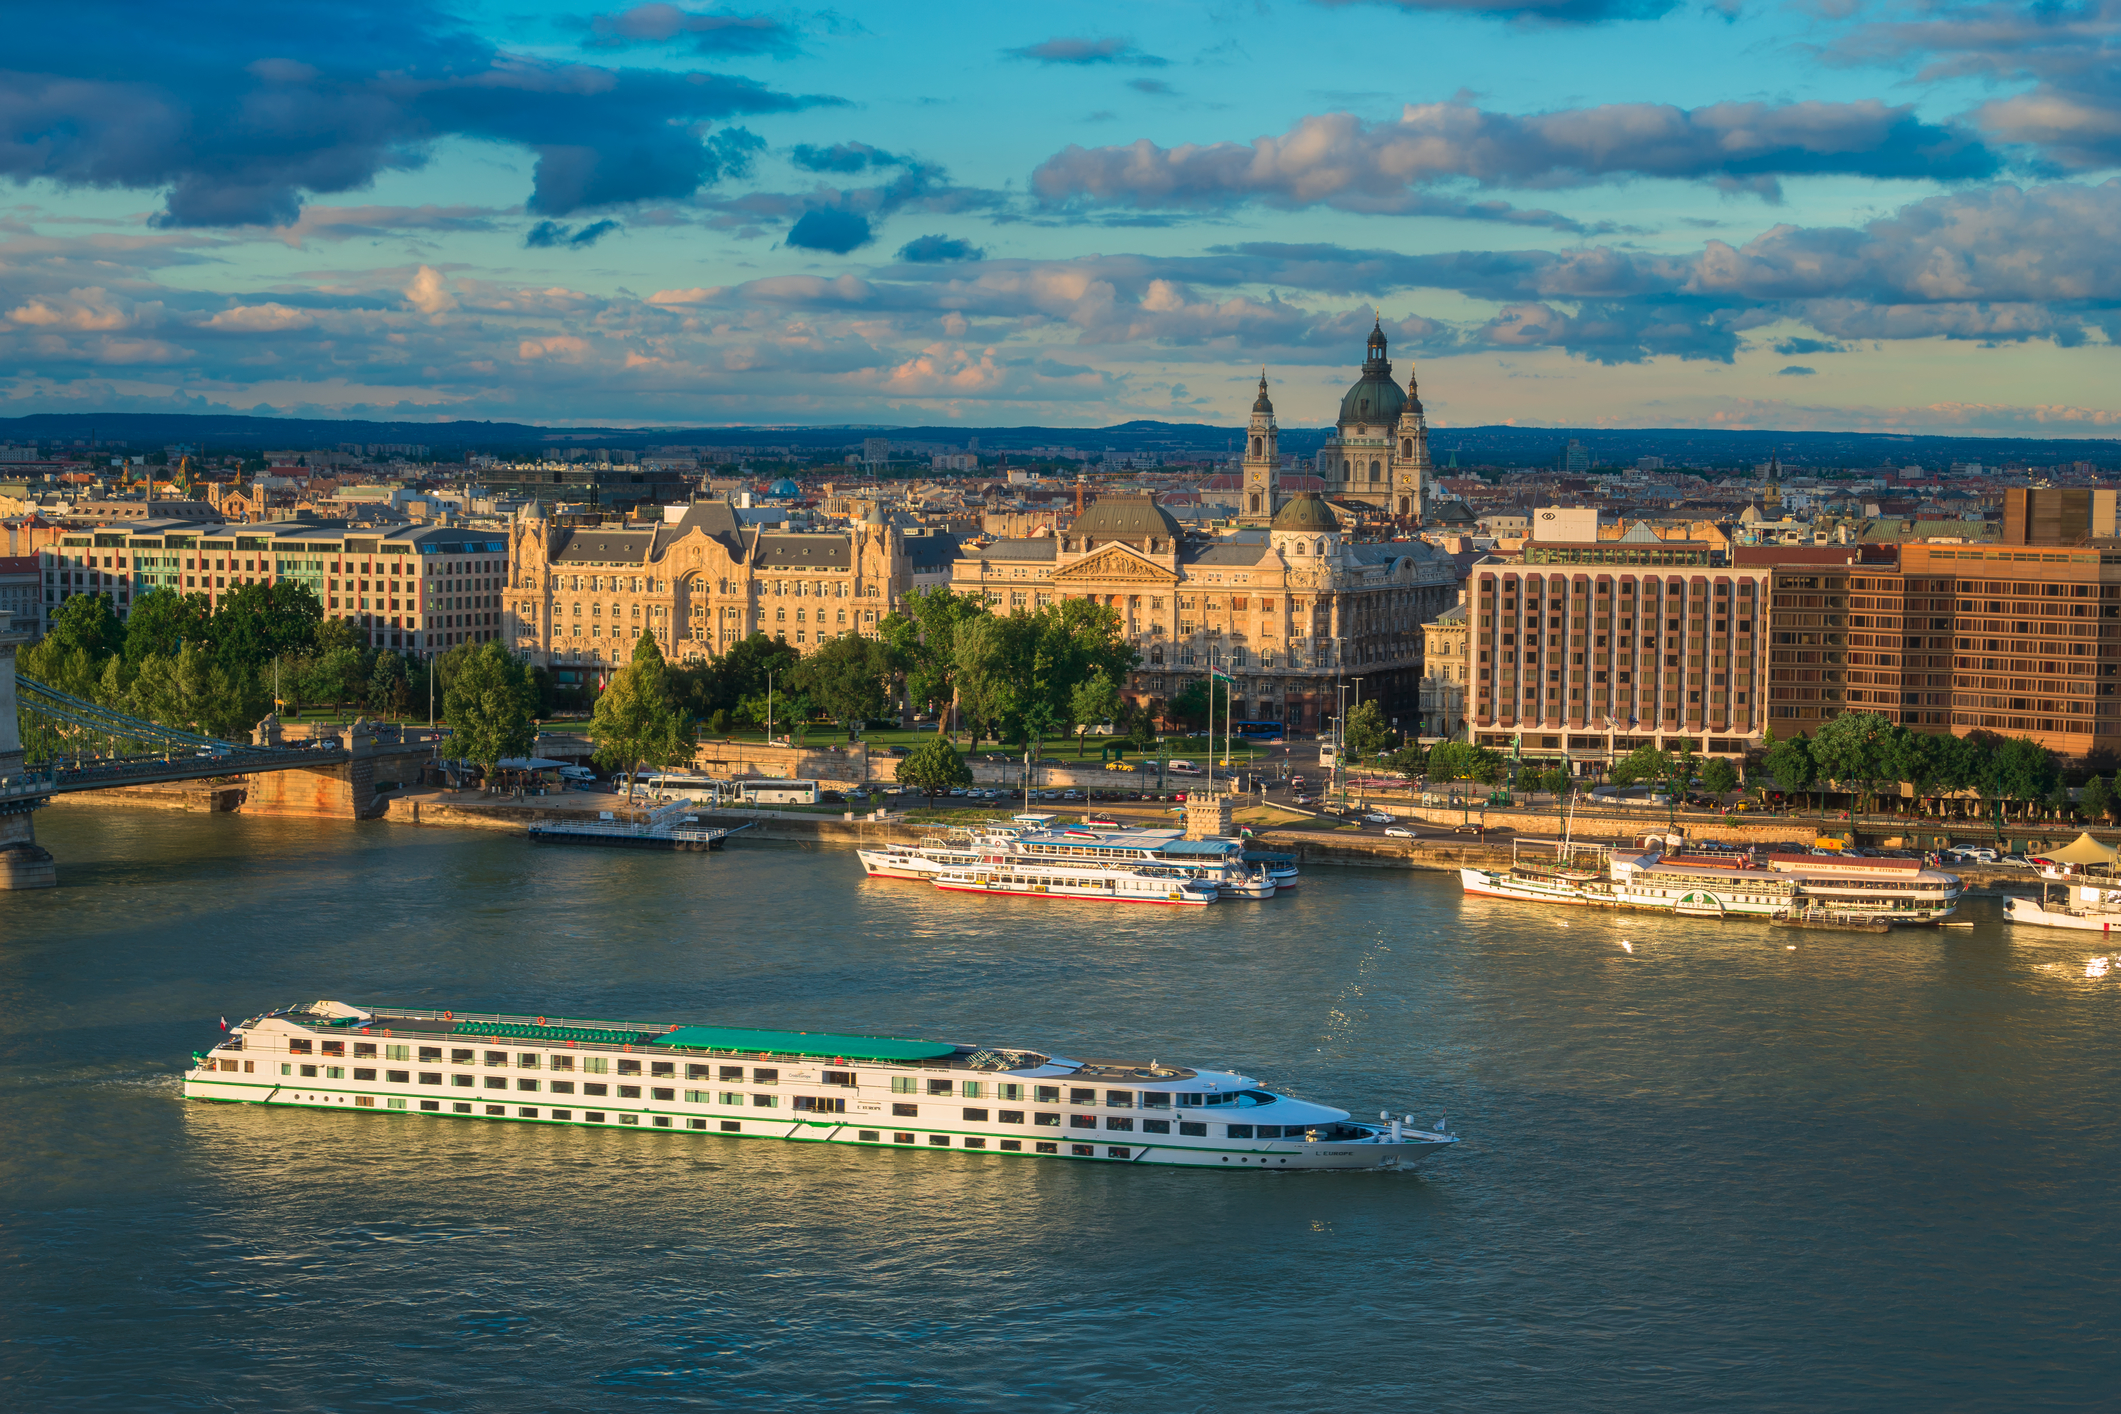 9-day, 4-country Danunbe river cruise from $1,199